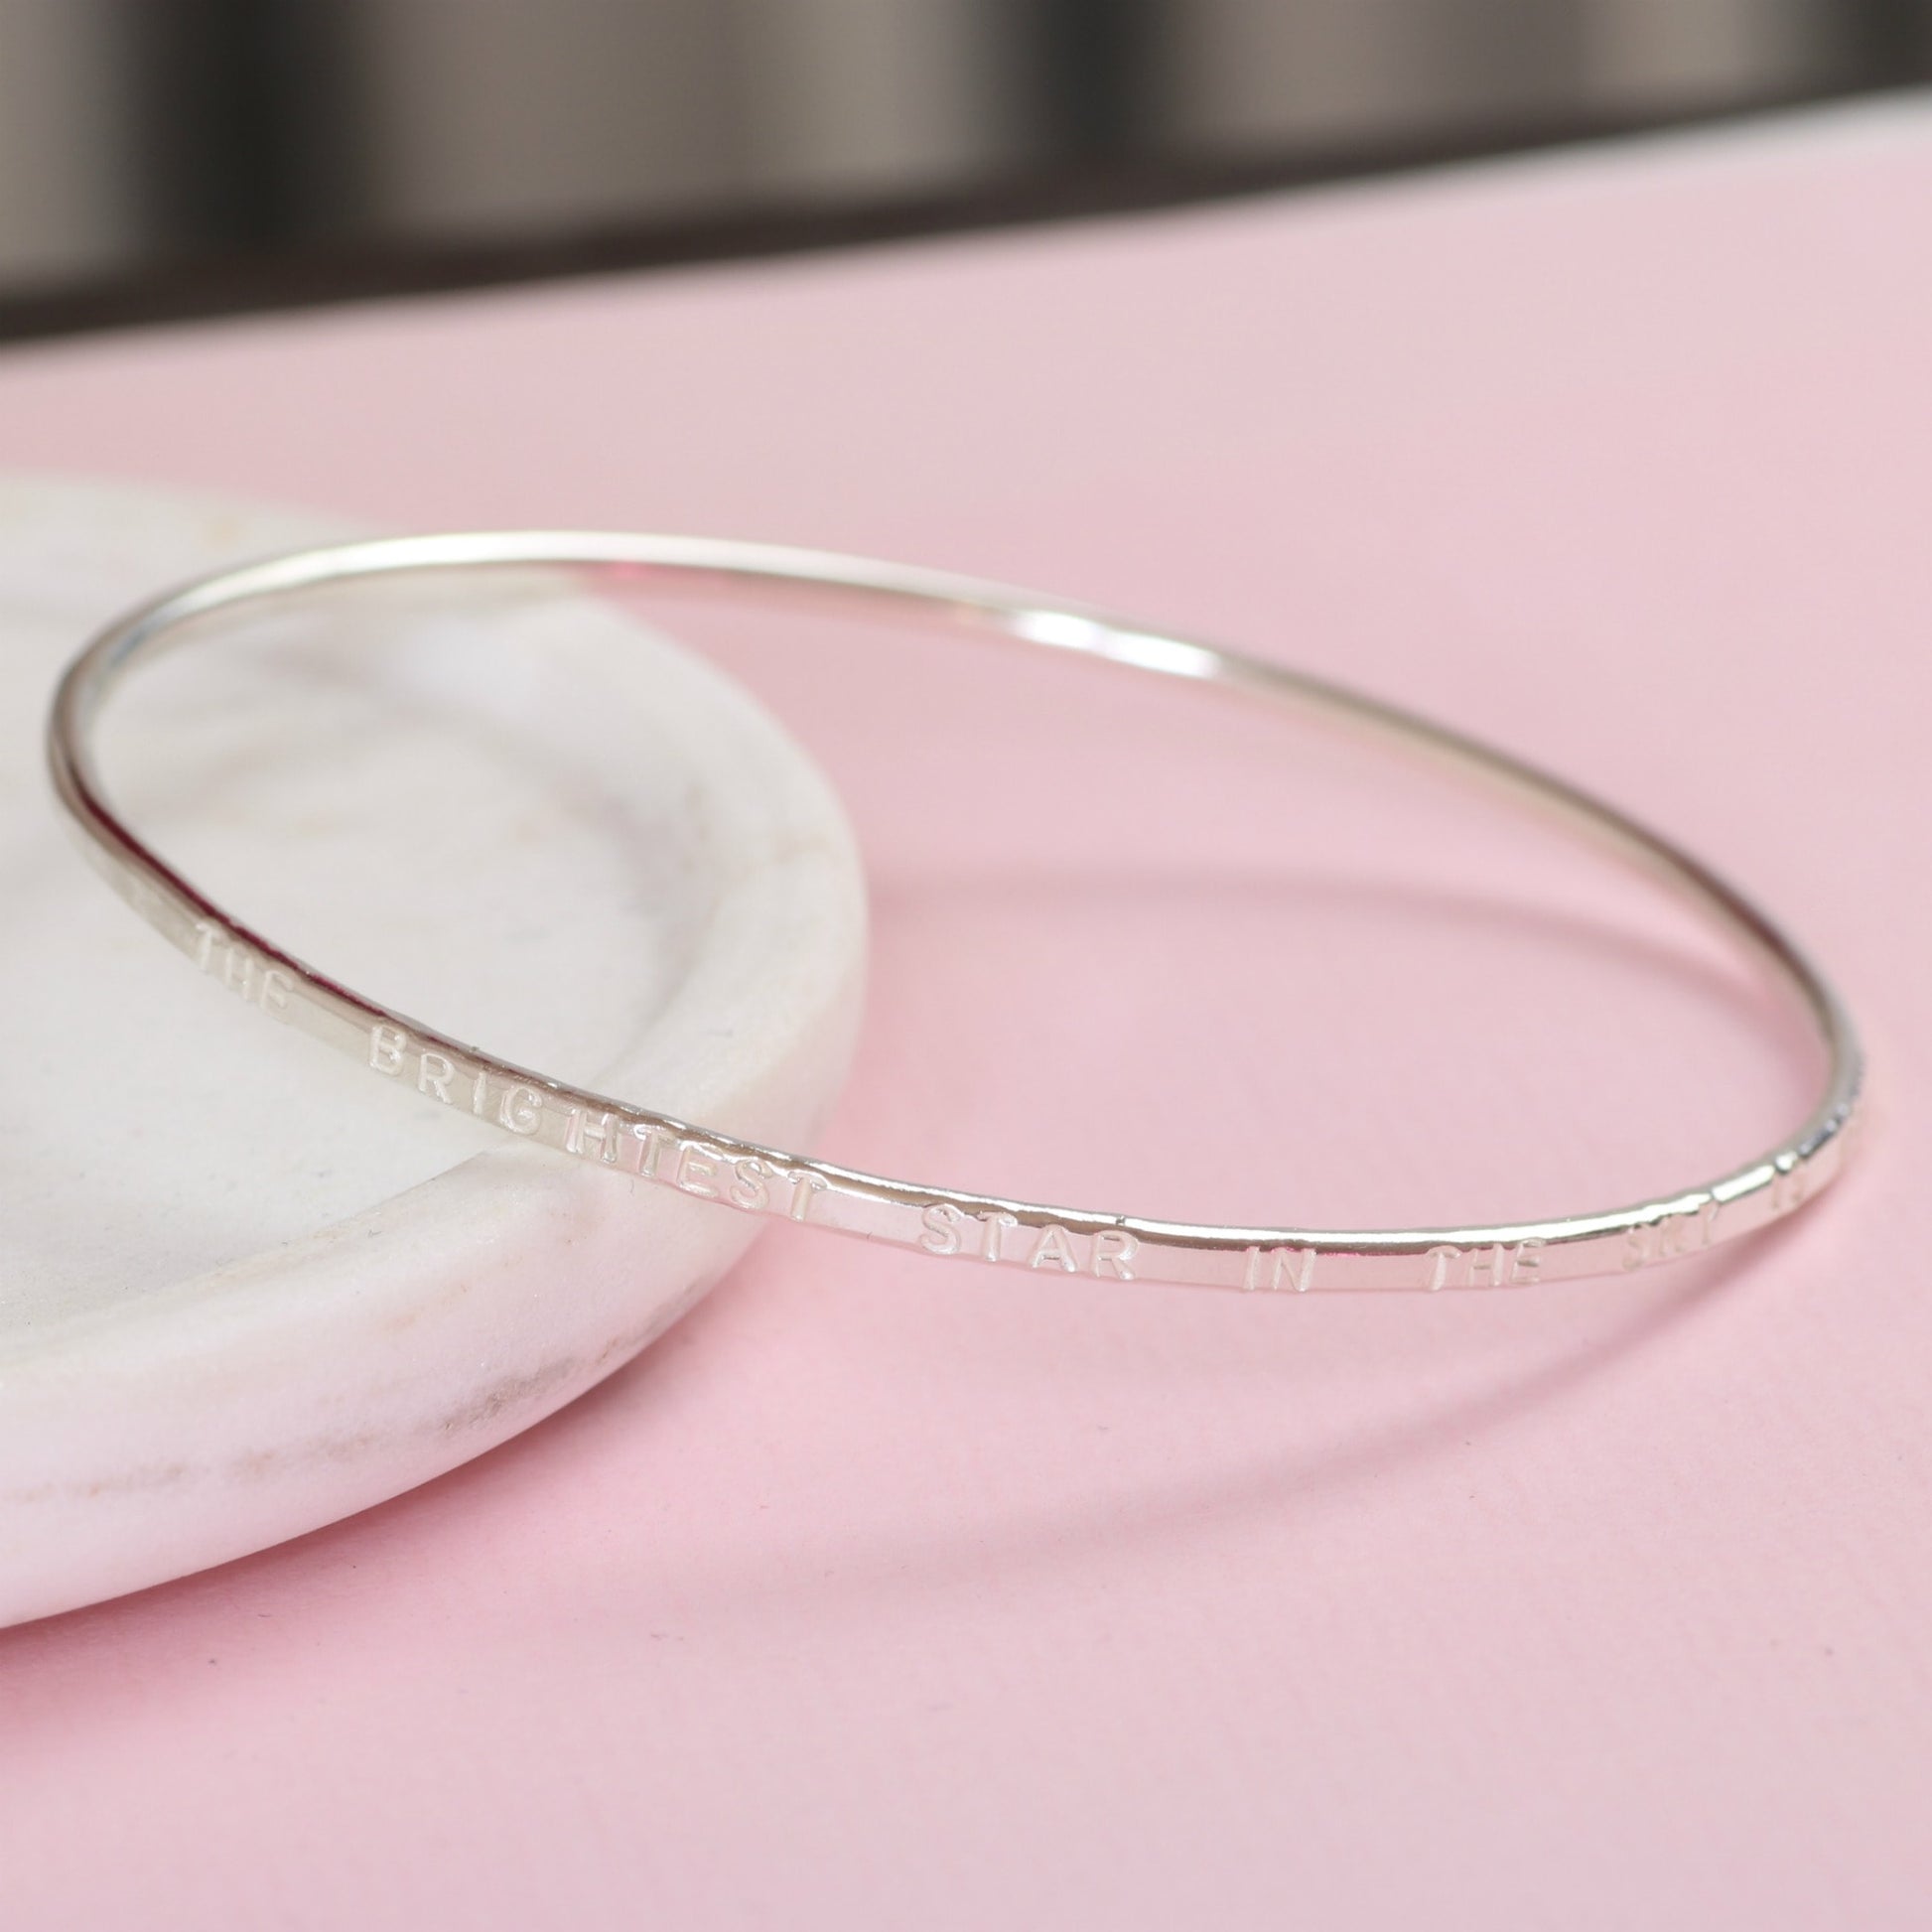 Personalised Silver Bangle for Daughter - Hand Stamped with Names or Words